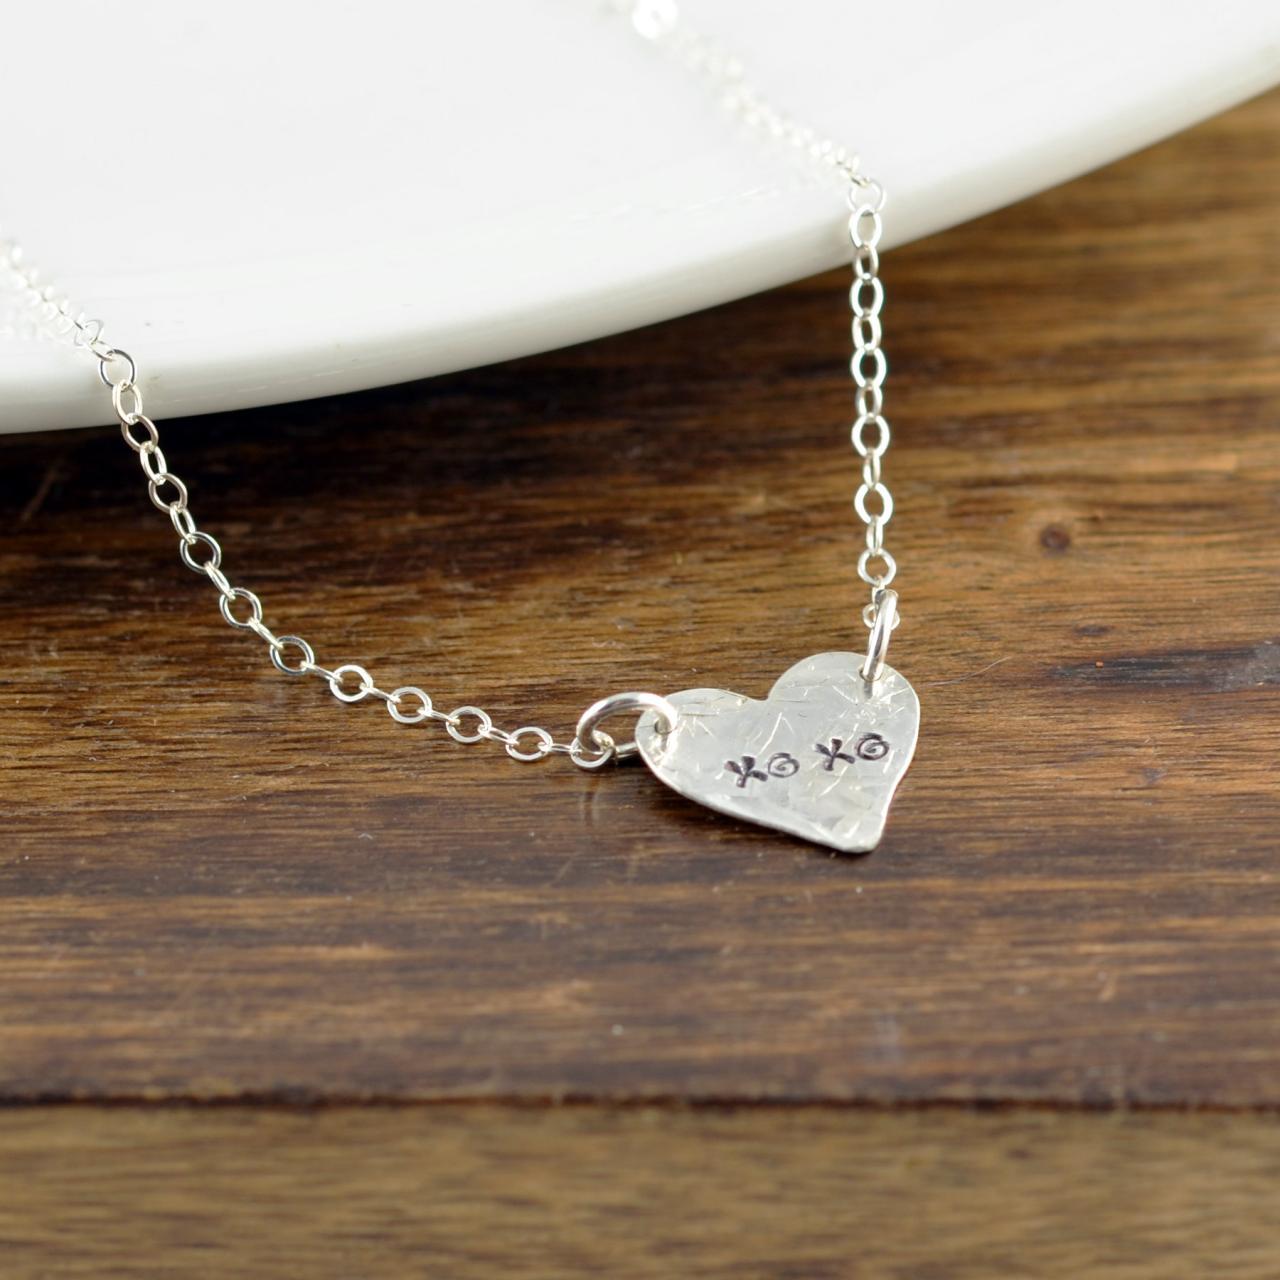 Xo Jewelry, Xo Necklace, Xo Pendant, Hugs And Kisses, Gift For Wife, Gift For Girlfriend, Valentines Day Gift, Valentines Necklace